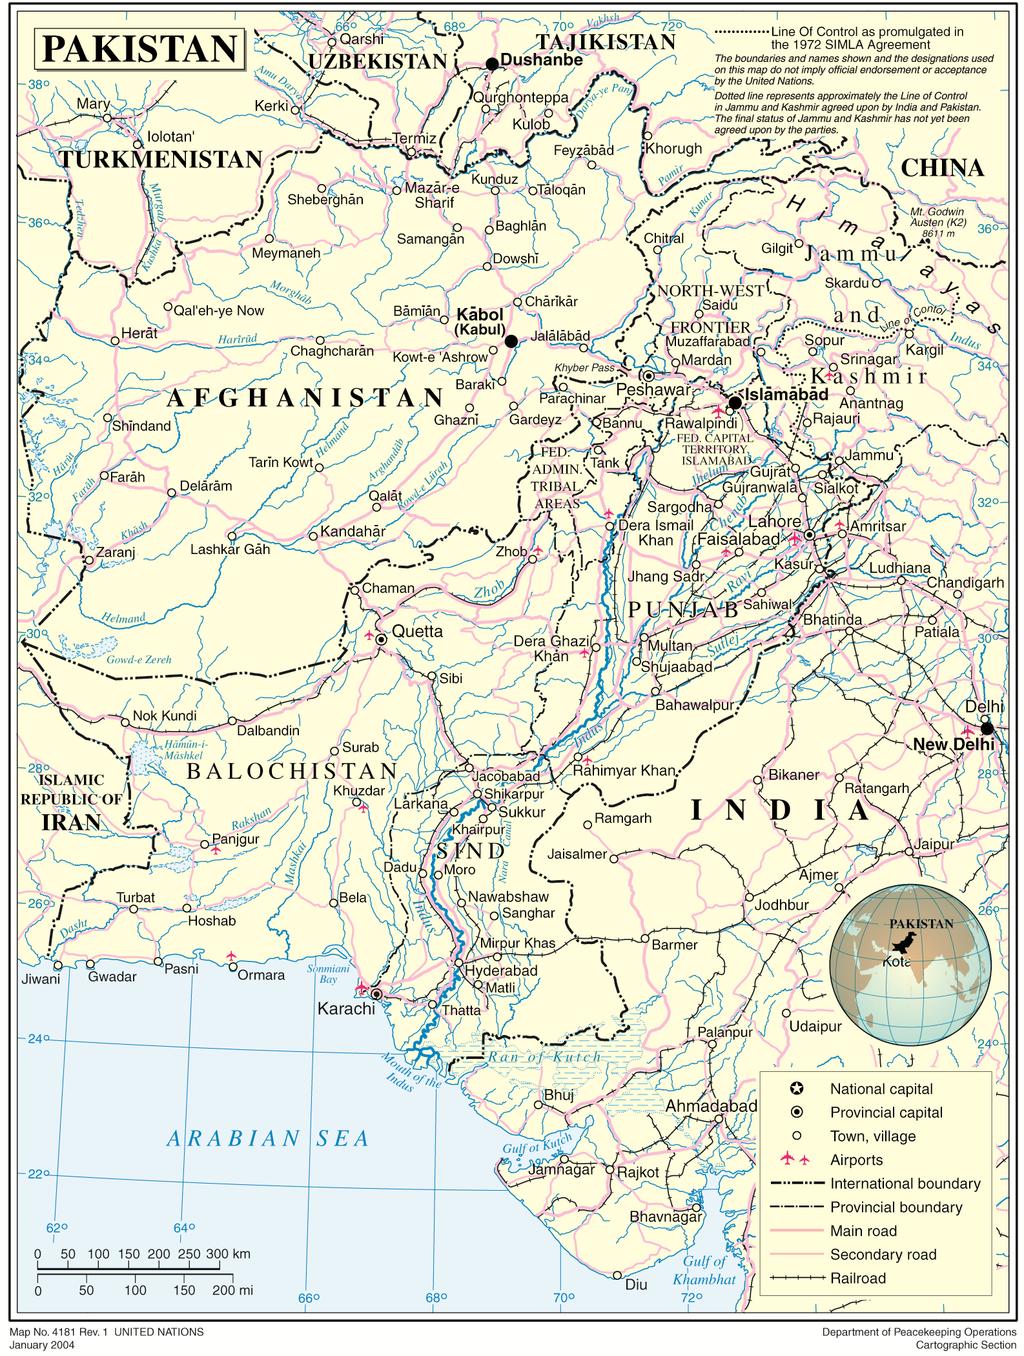 Pakistan: Countering Militancy in PATA Crisis Group Asia